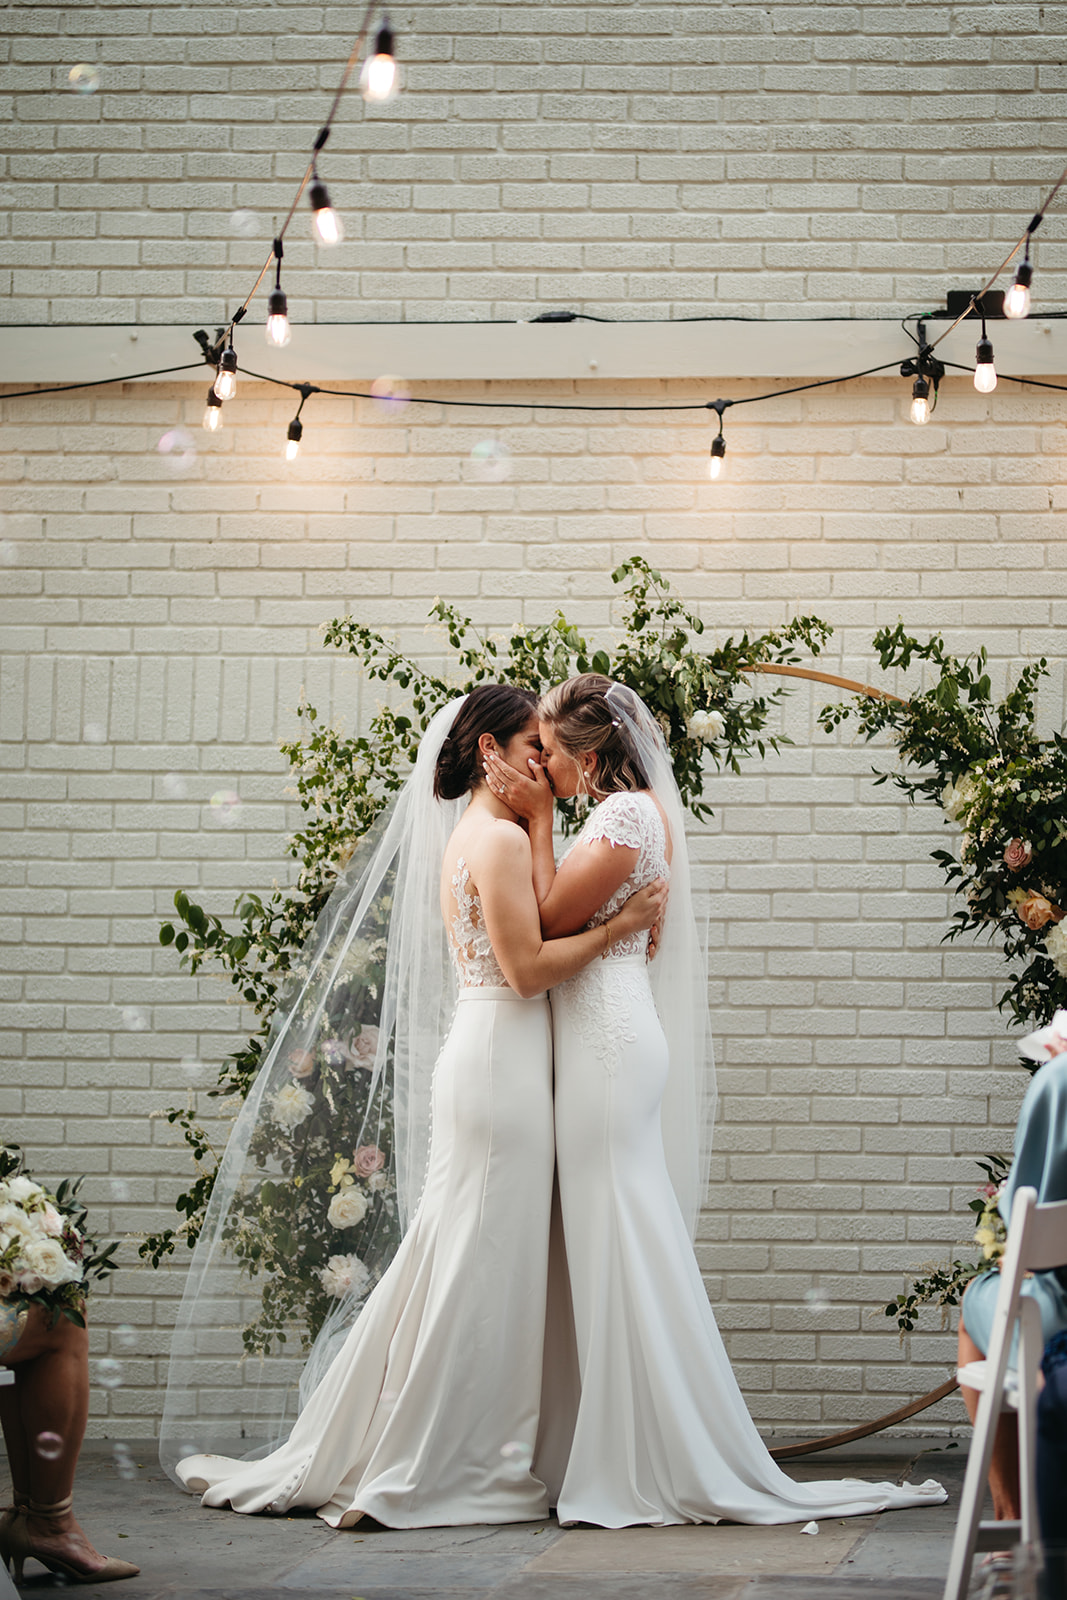 Two brides in dresses kissing at wedding ceremony